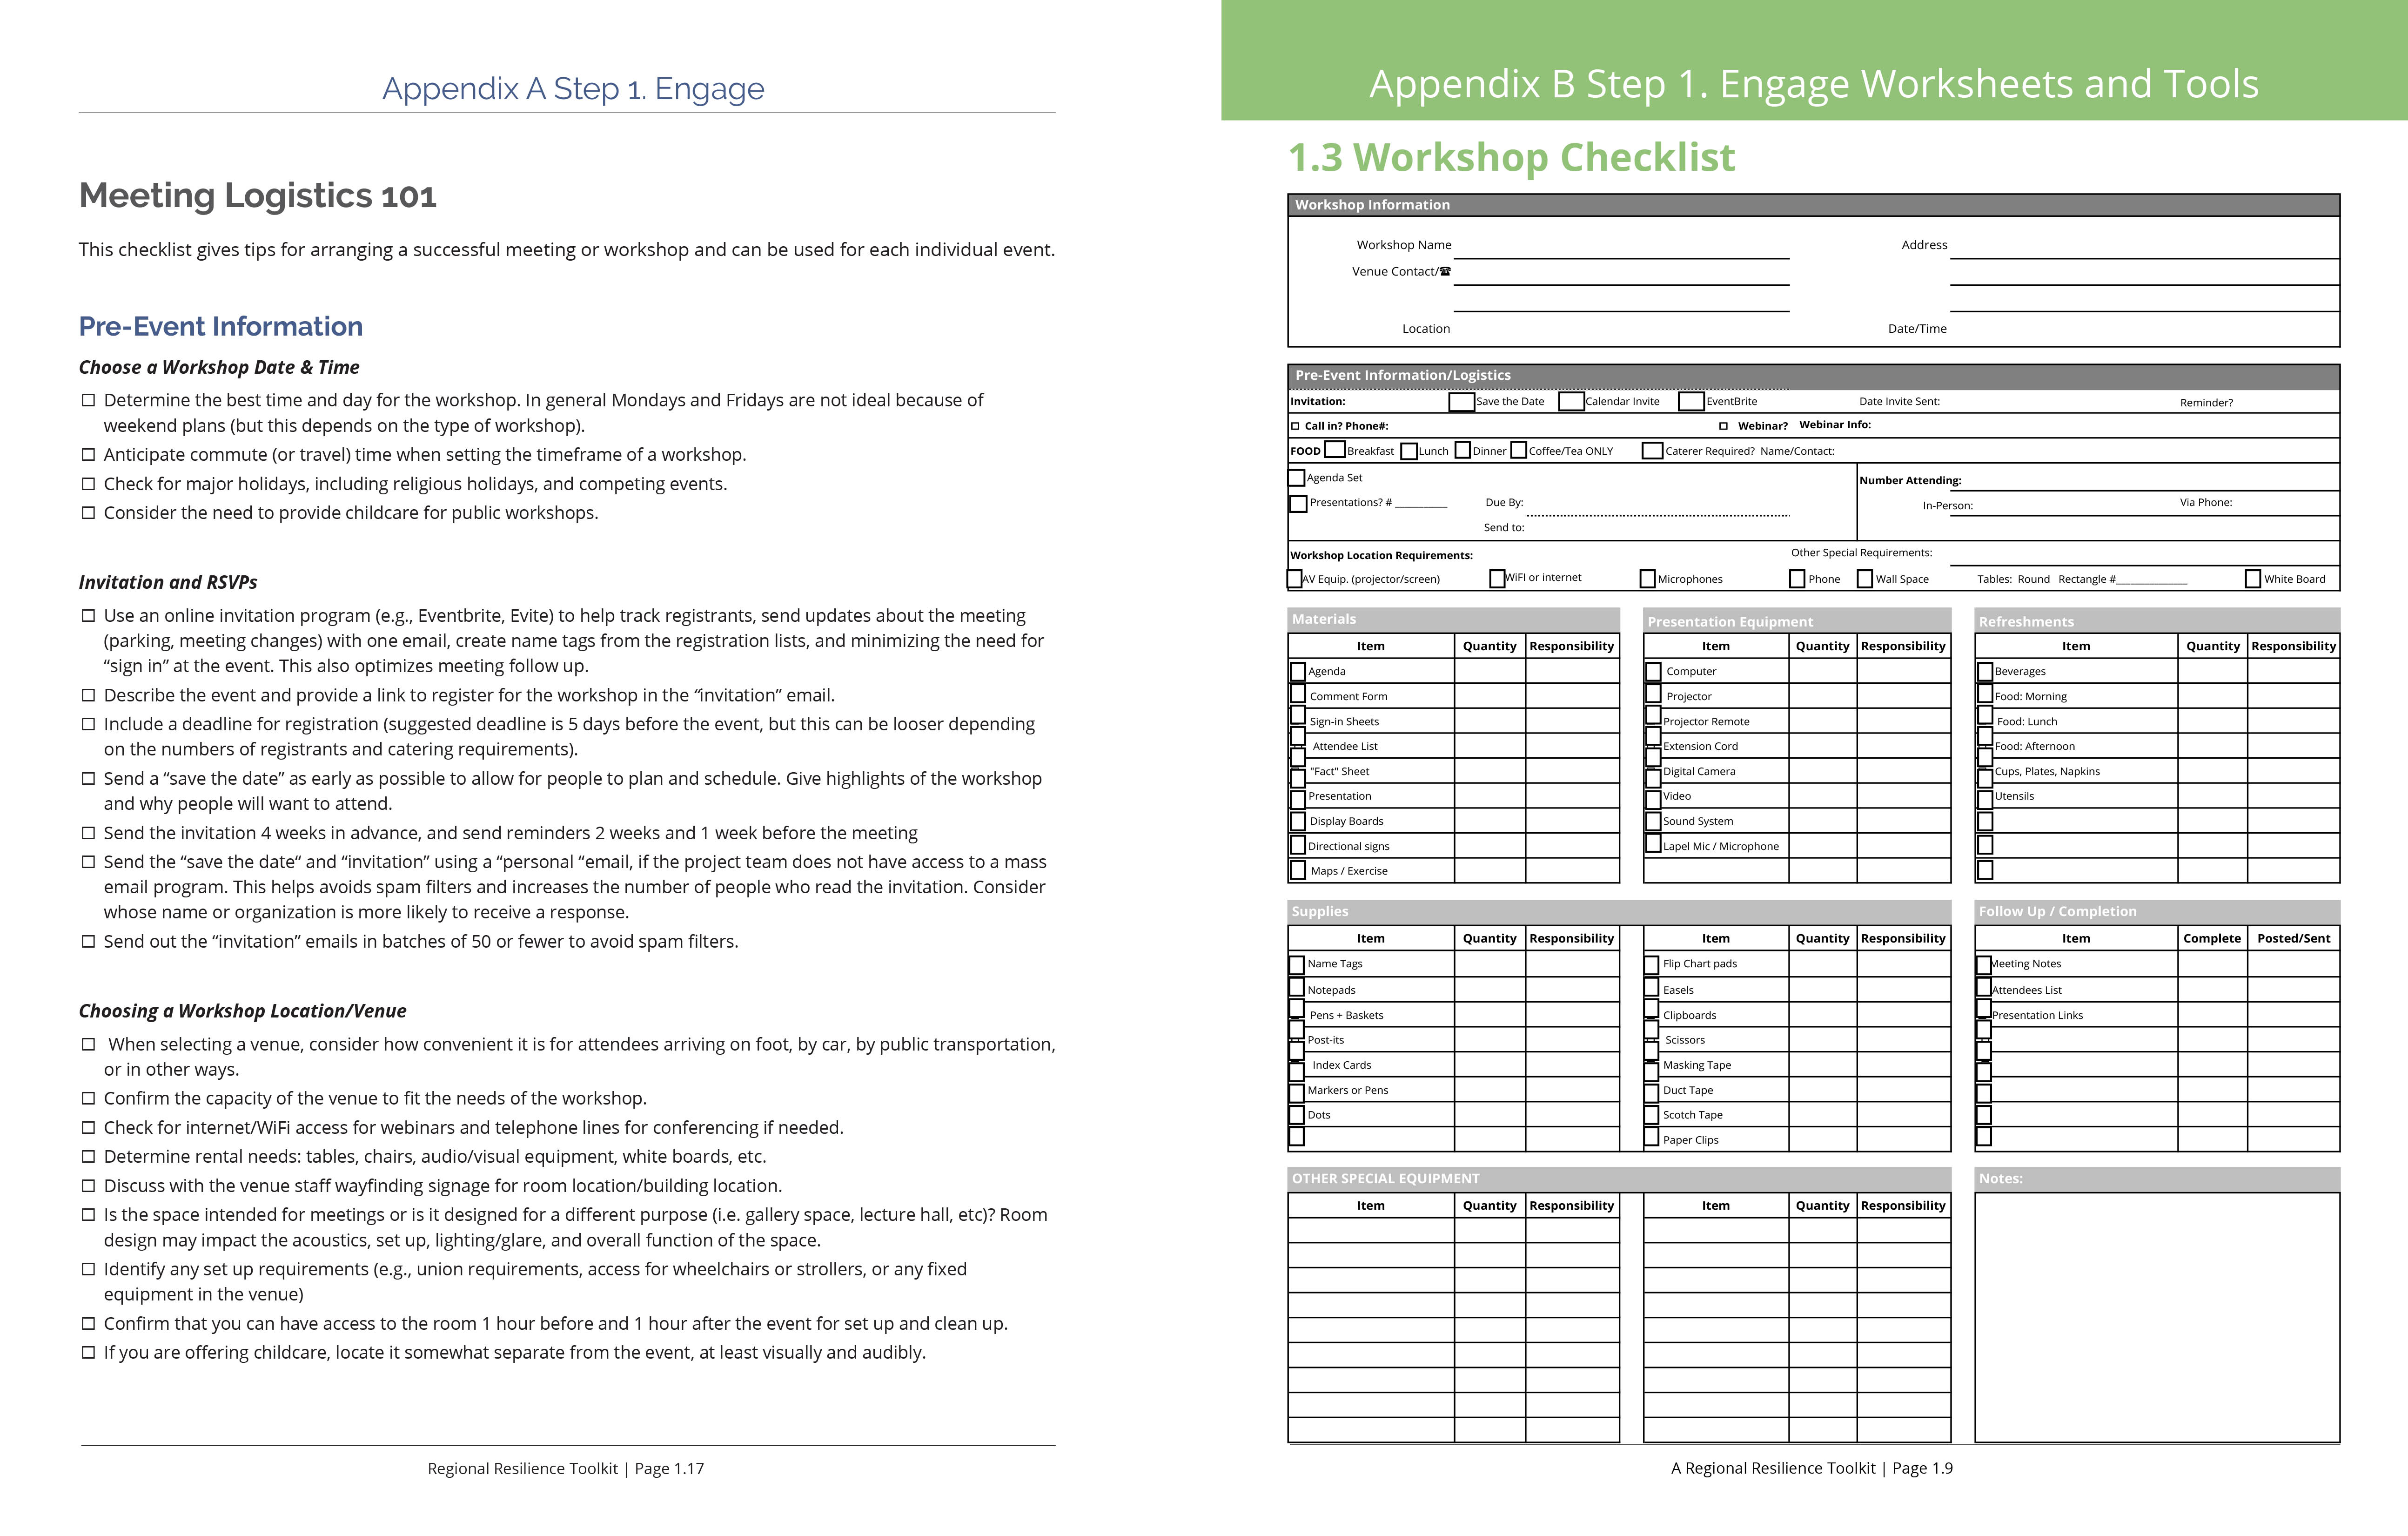 Figure 13 Example Templates and Worksheet from the Regional Resilience Toolkit